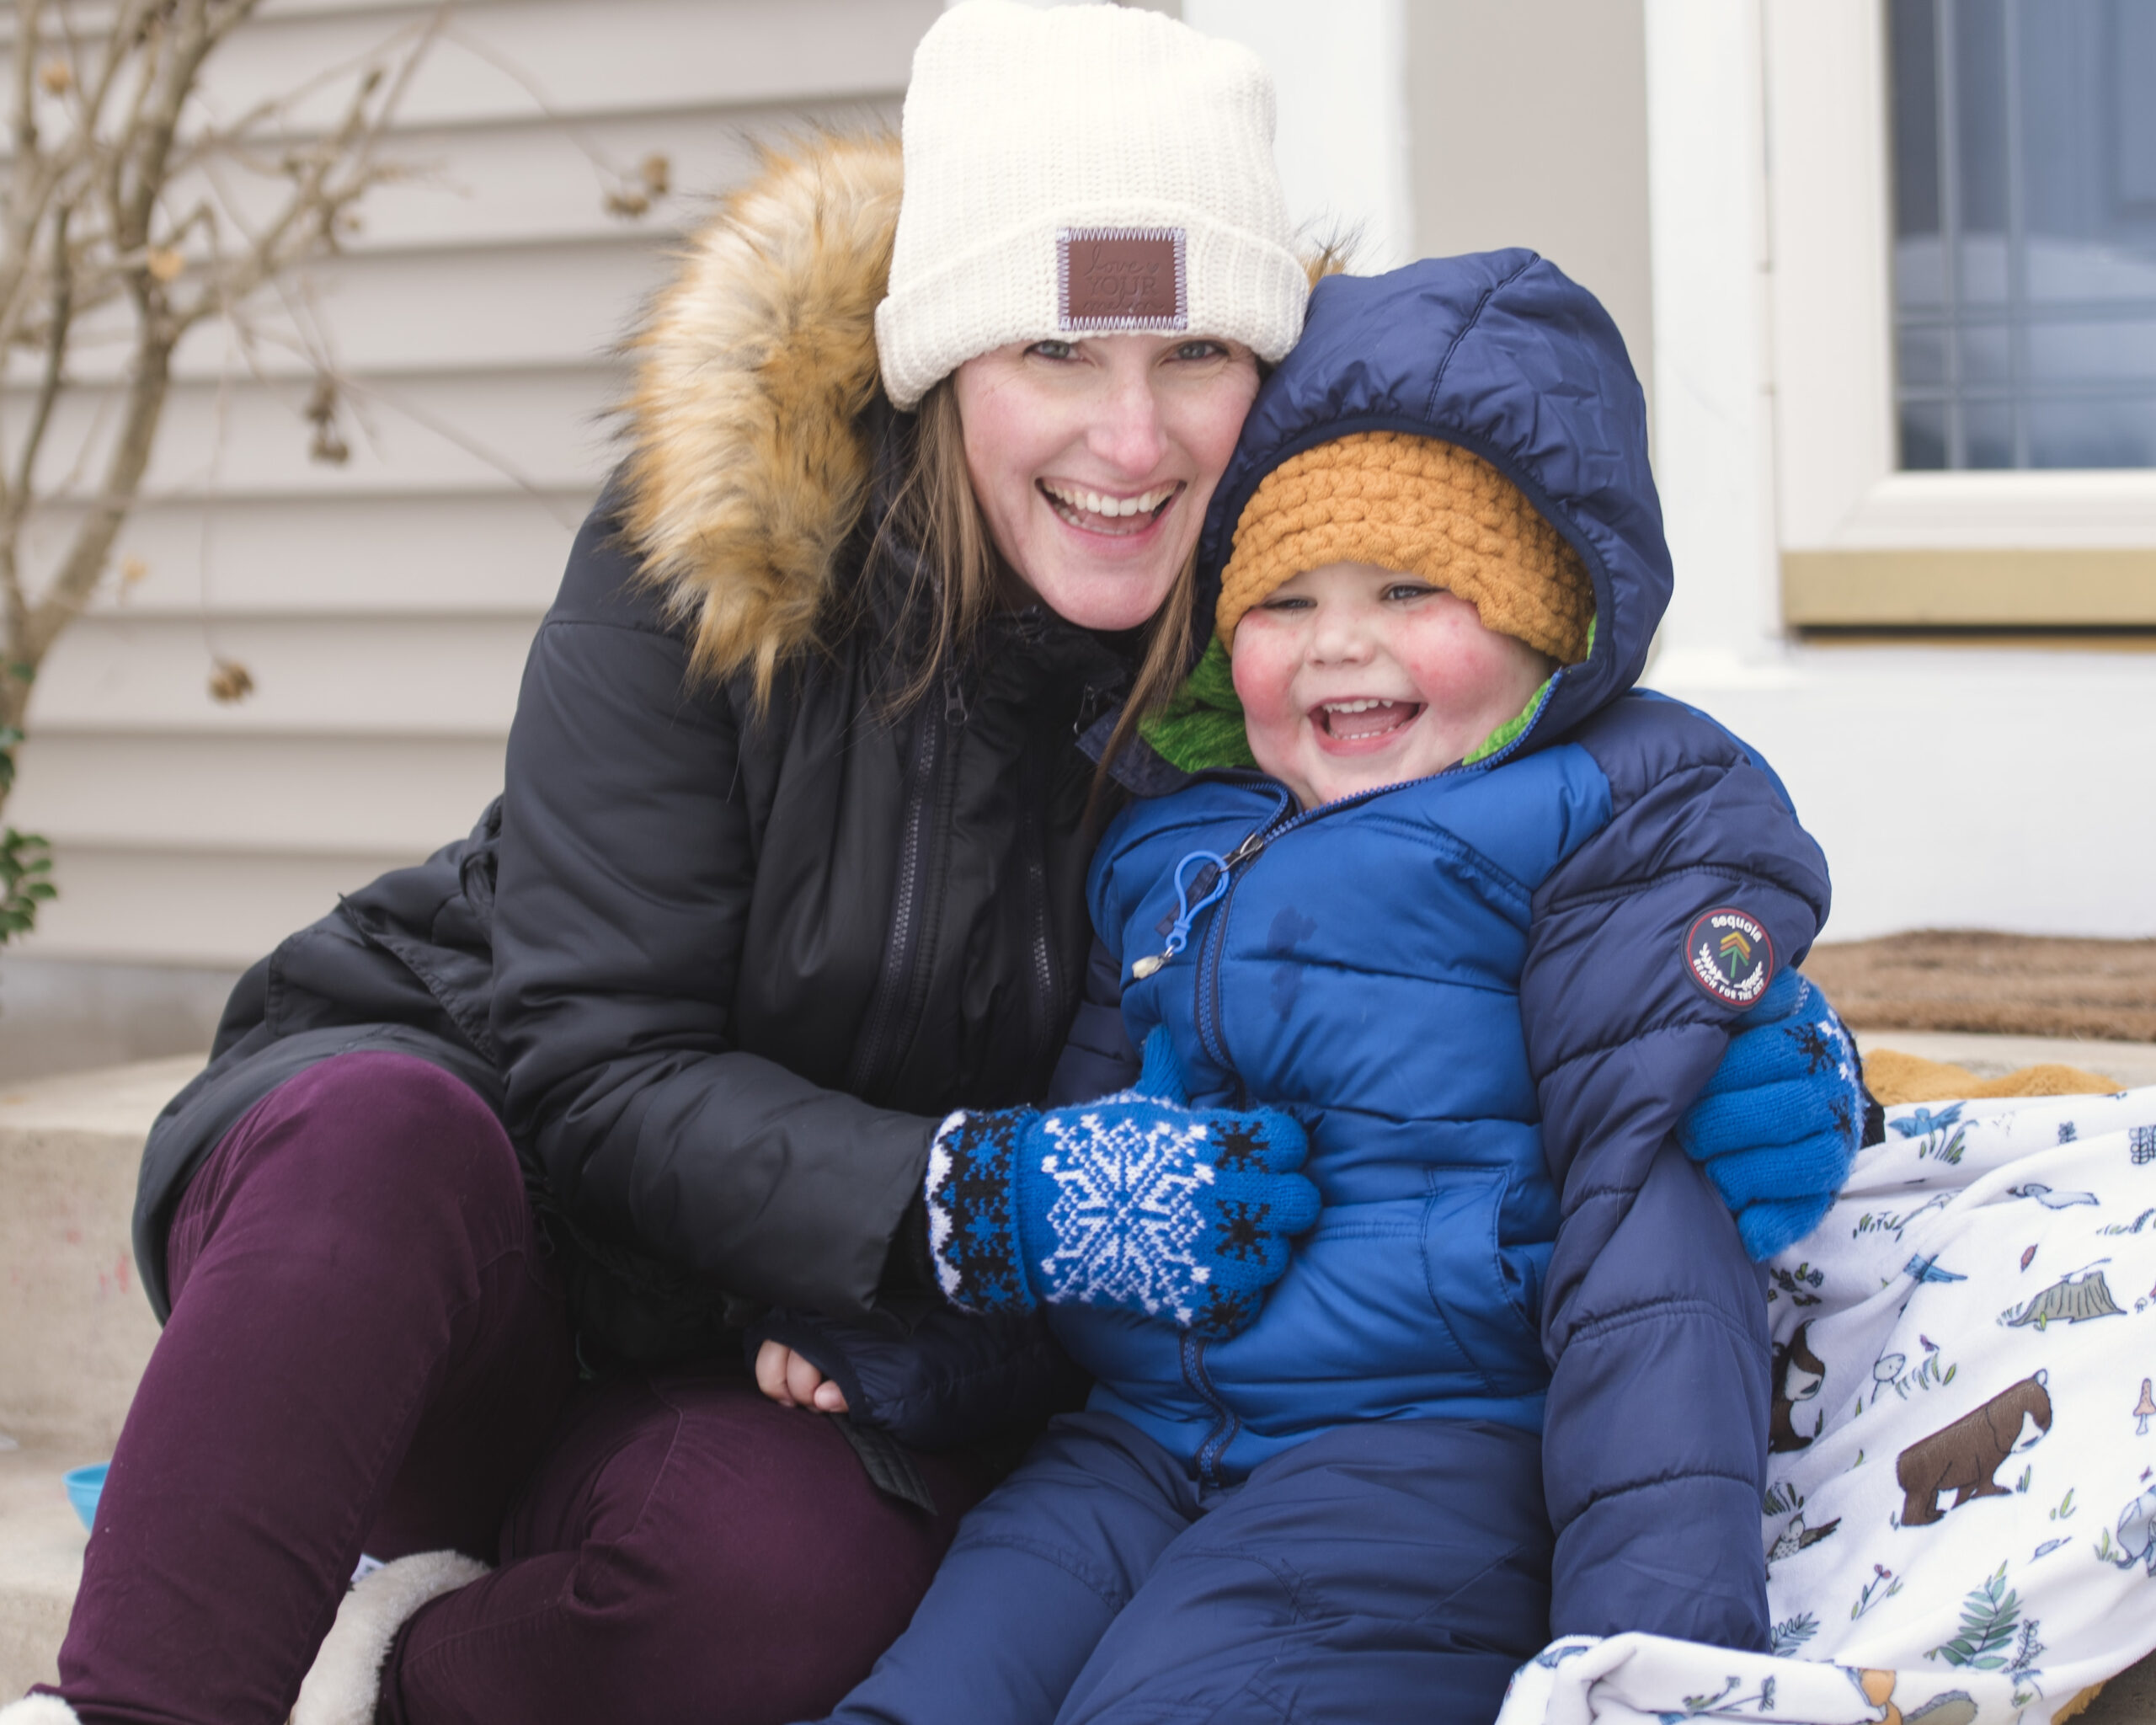 cancer hero Ollie with his Mom outdoors in winter coats and hats